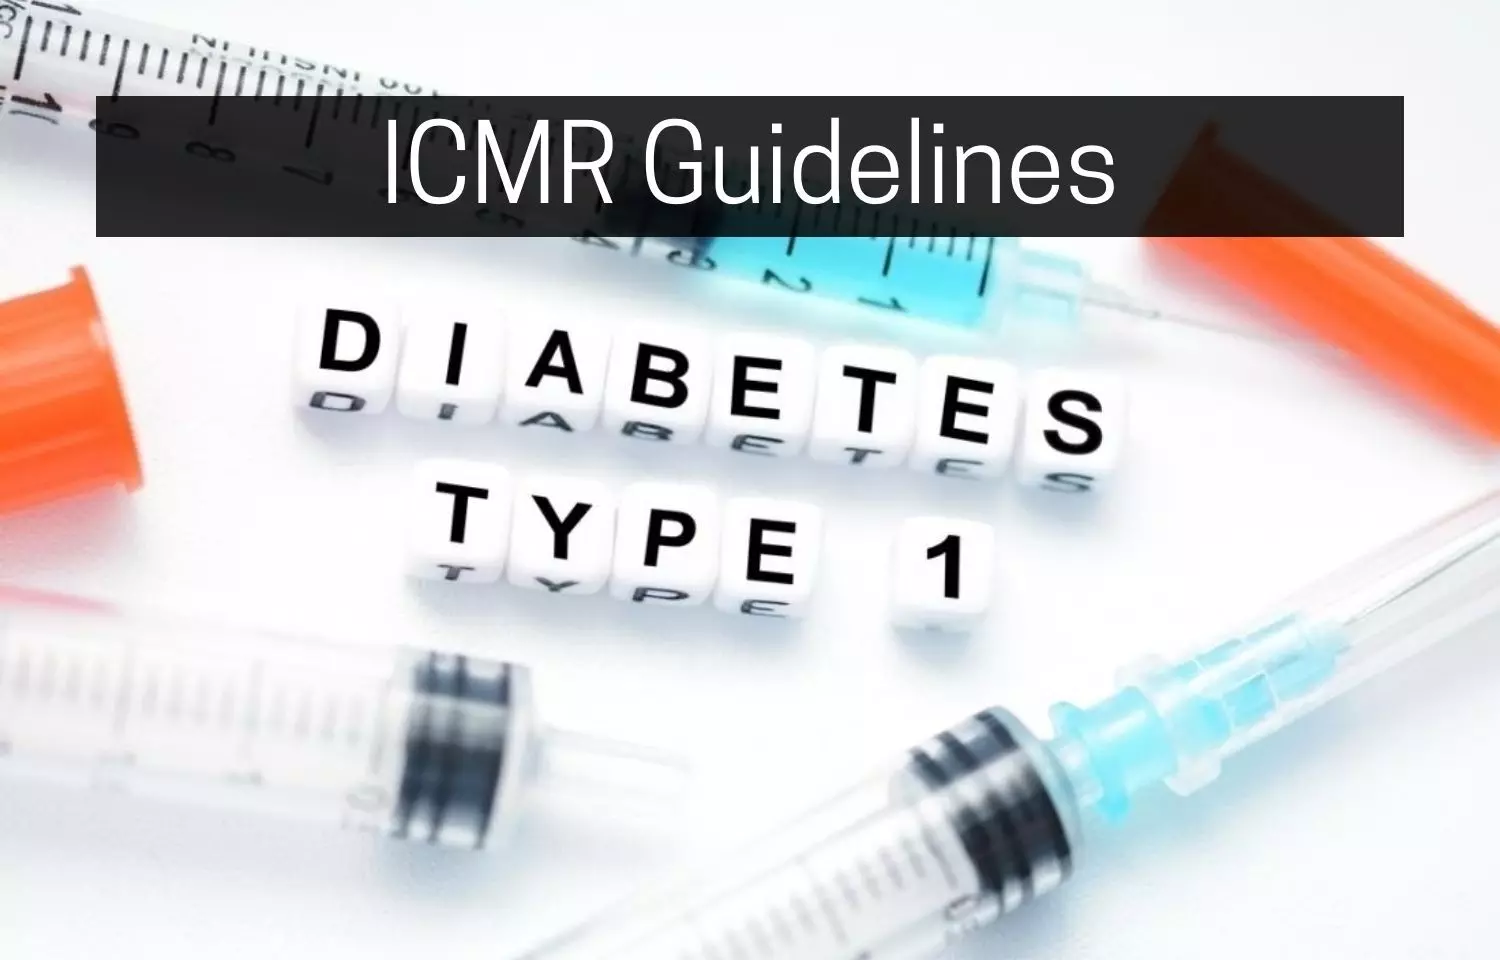 Management of Type 1 Diabetes: ICMR releases guidelines